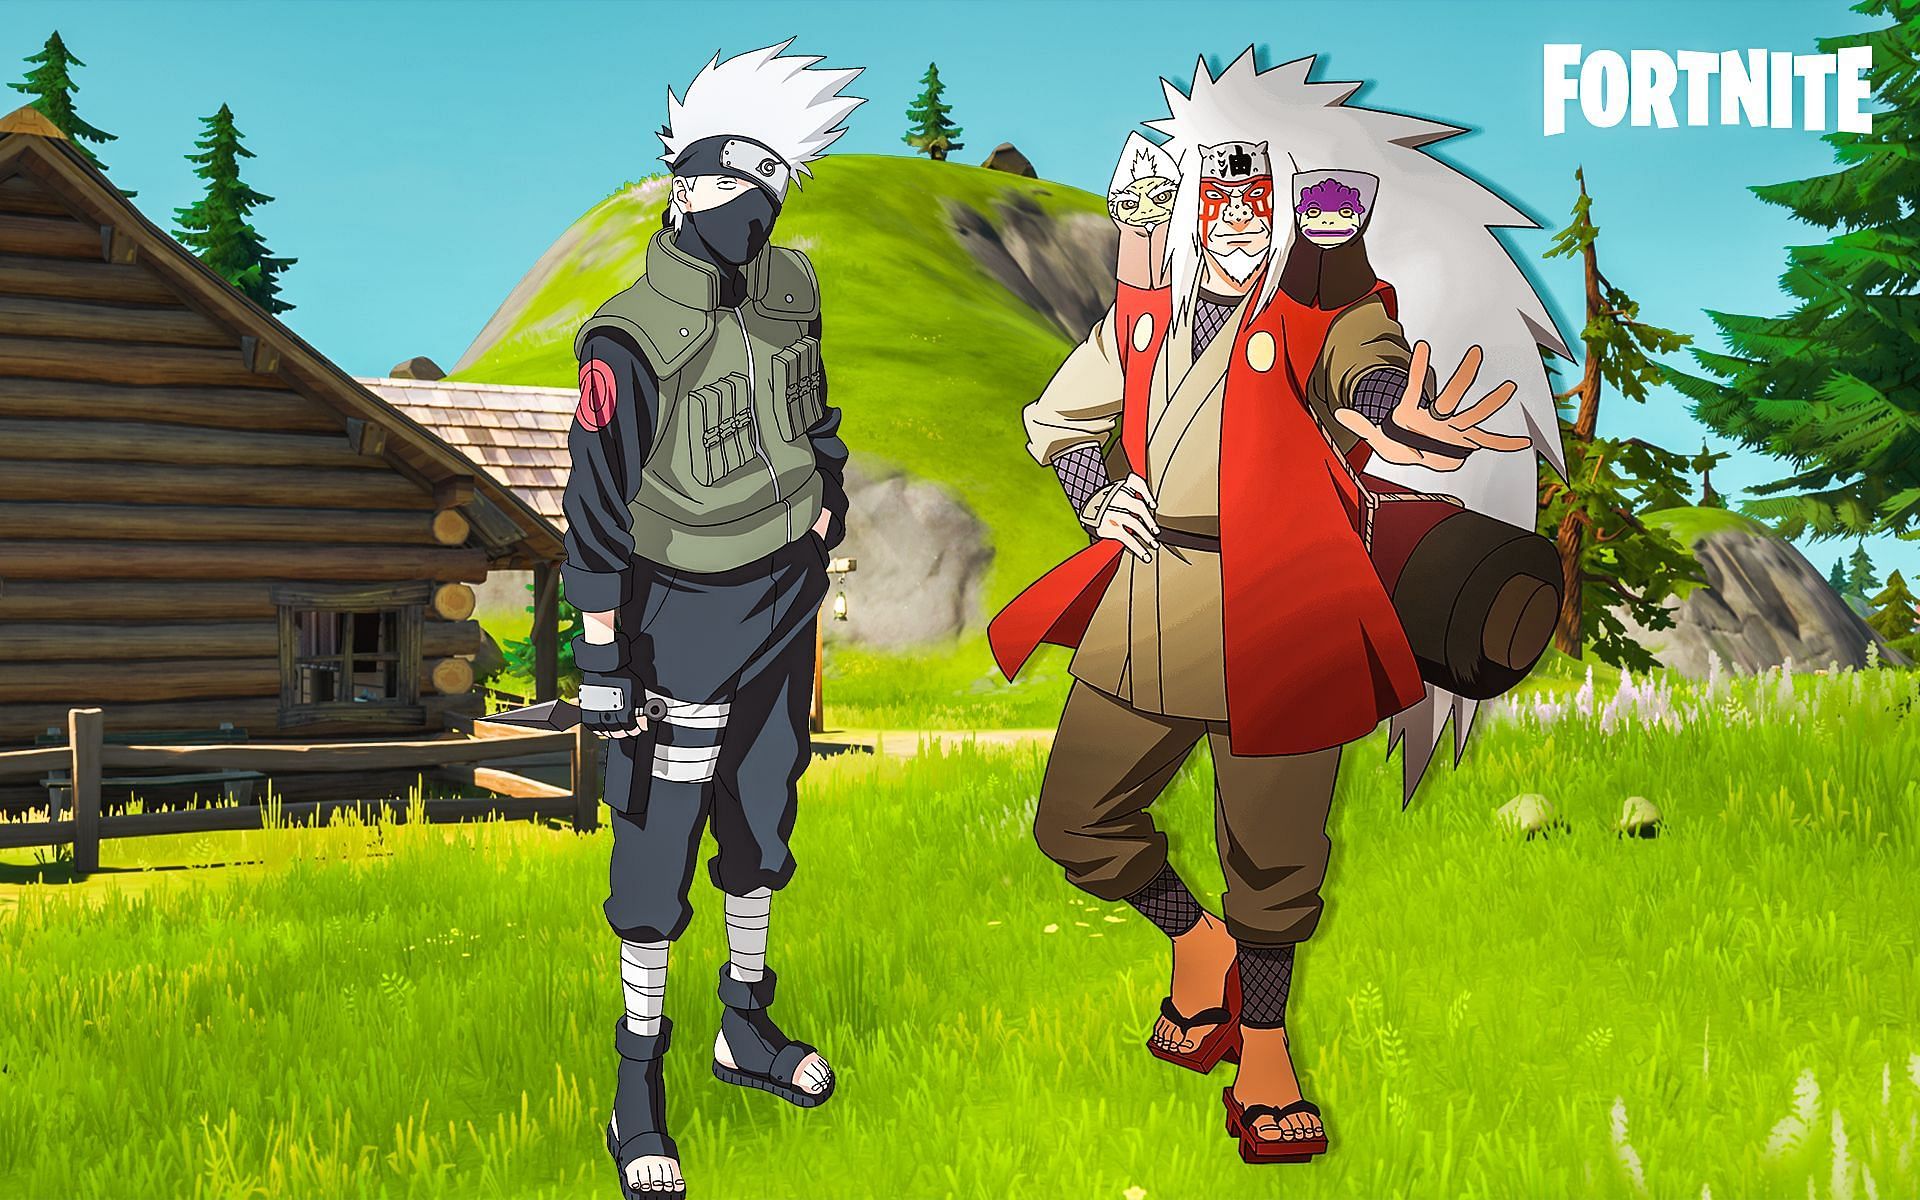 The Naruto crossover is much awaited in Fortnite (Image via Sportskeeda)